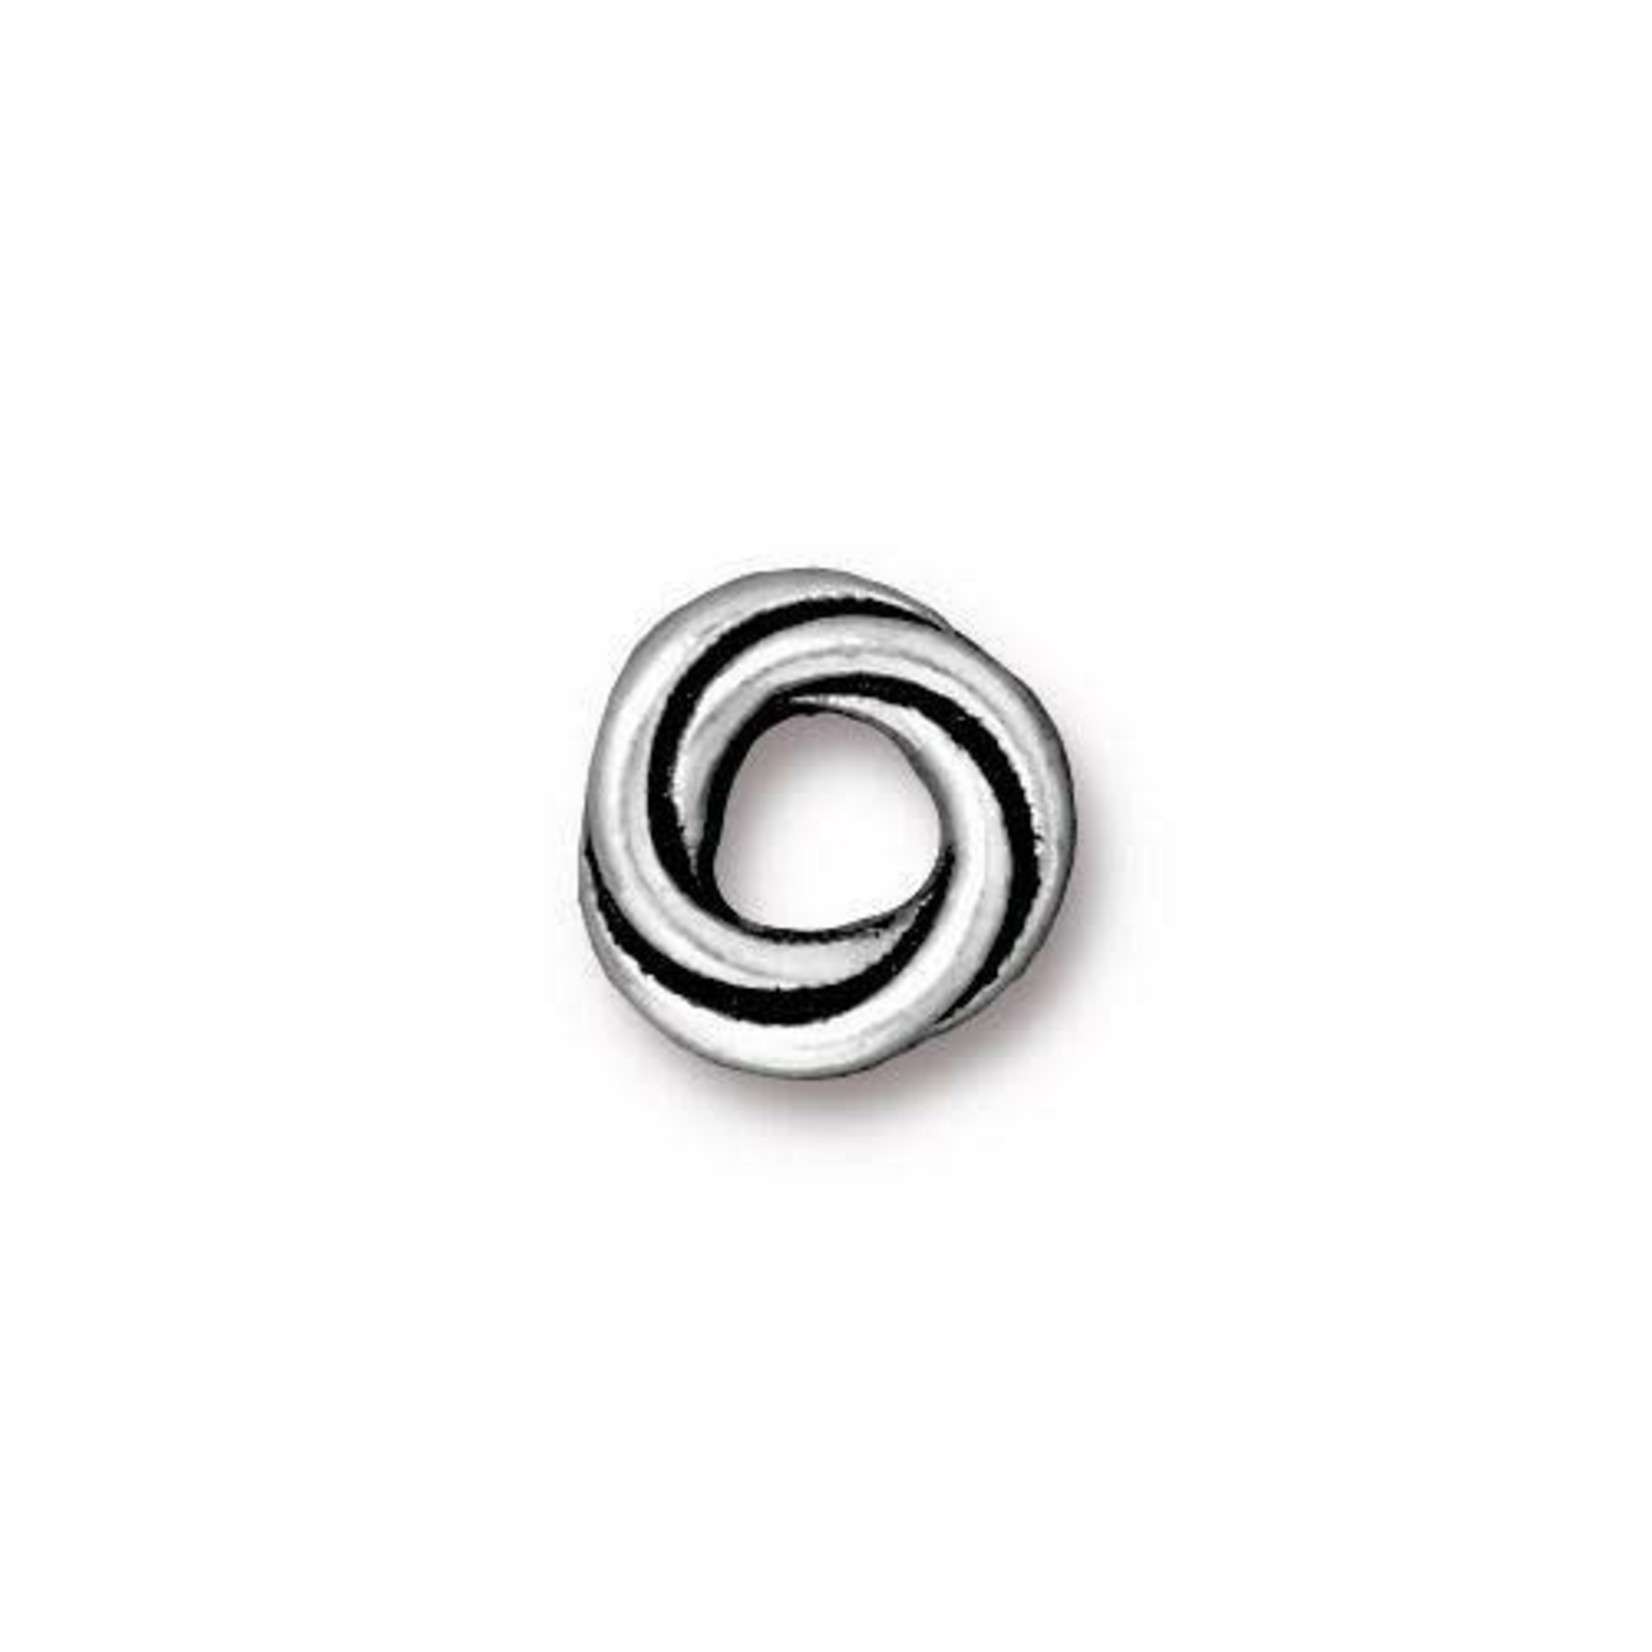 TierraCast Tierracast Antique Silver Plated 10mm Twisted Spacer